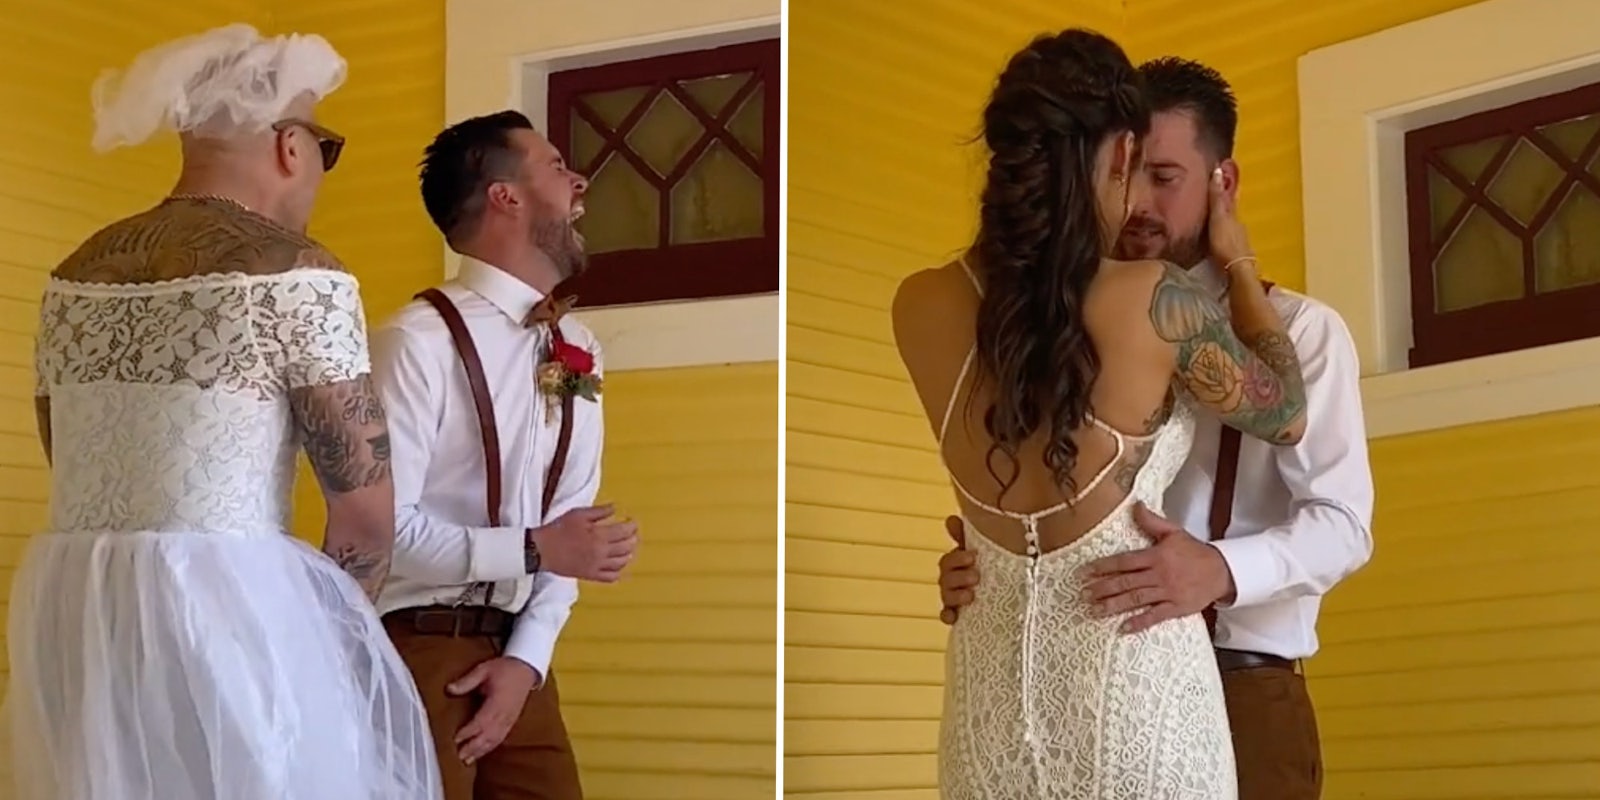 groomsman dressed as bride during first look, real first look with bride,